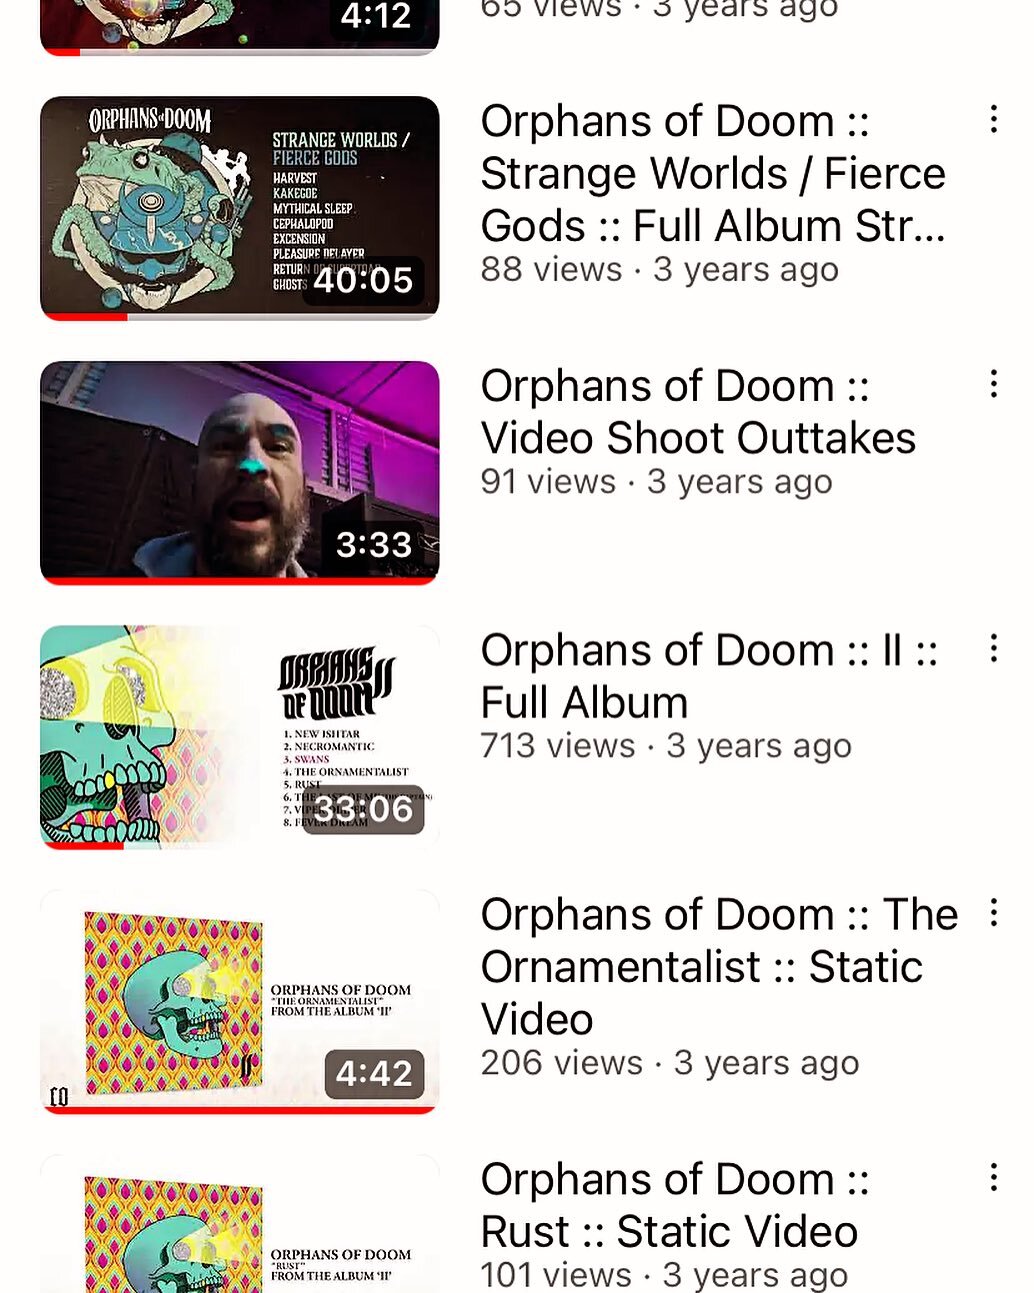 Be a dove and go subscribe to our YouTube channel for outtakes, videos, full songs and full albums.

https://youtube.com/@orphansofdoom2739?si=2X447nbZ9agdxLeJ